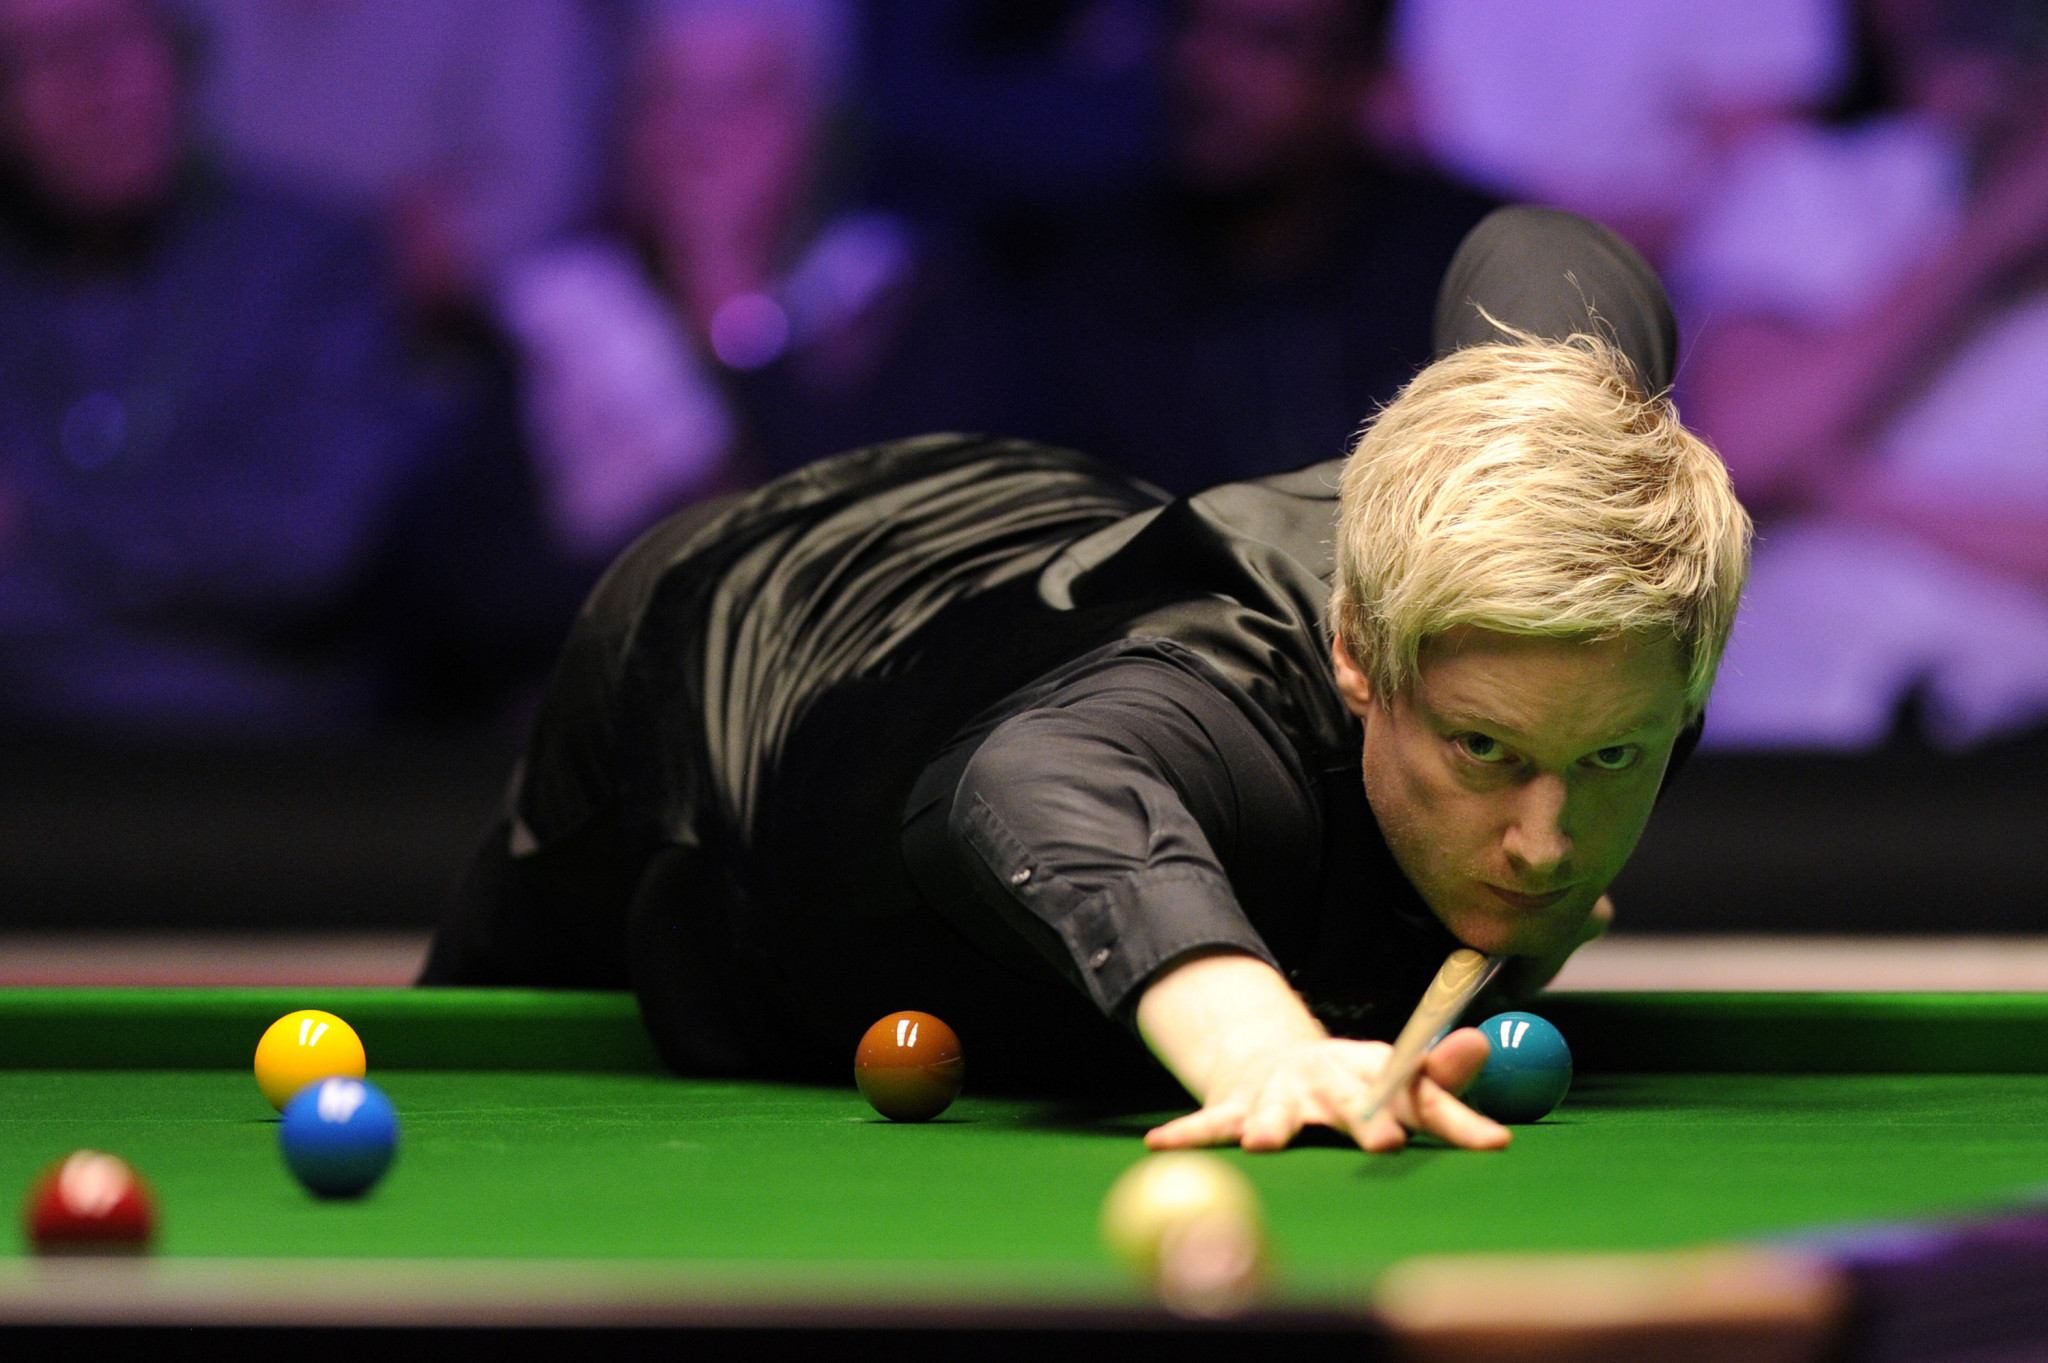 Australia's Neil Robertson is on course to book his place in the third round ©Getty Images